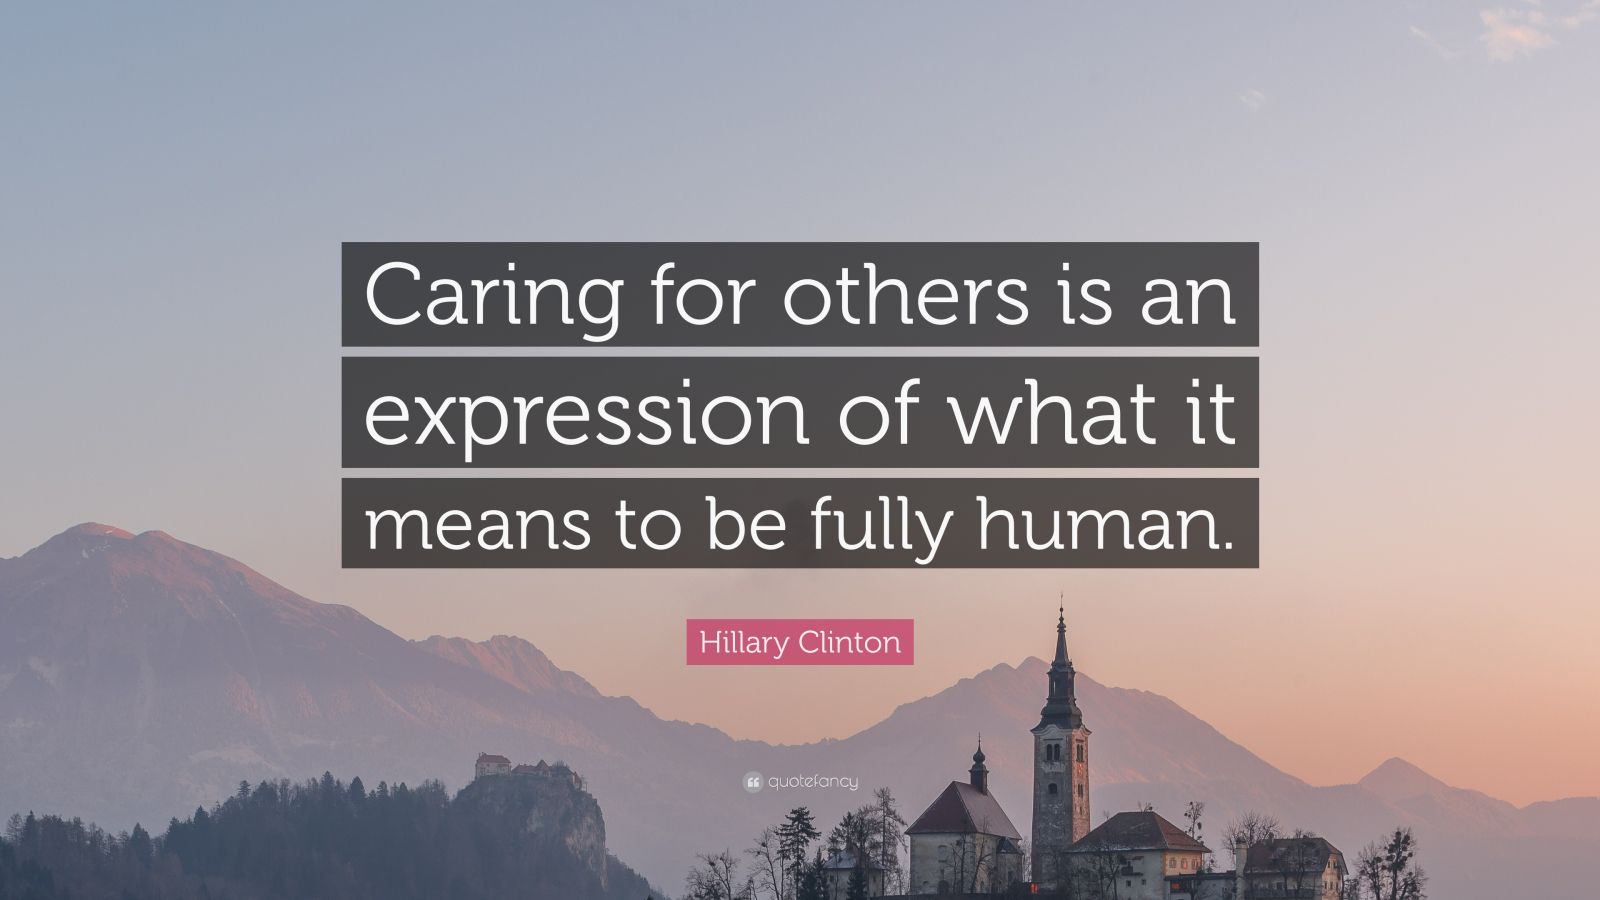 Hillary Clinton Quote: “Caring for others is an expression of what it ...